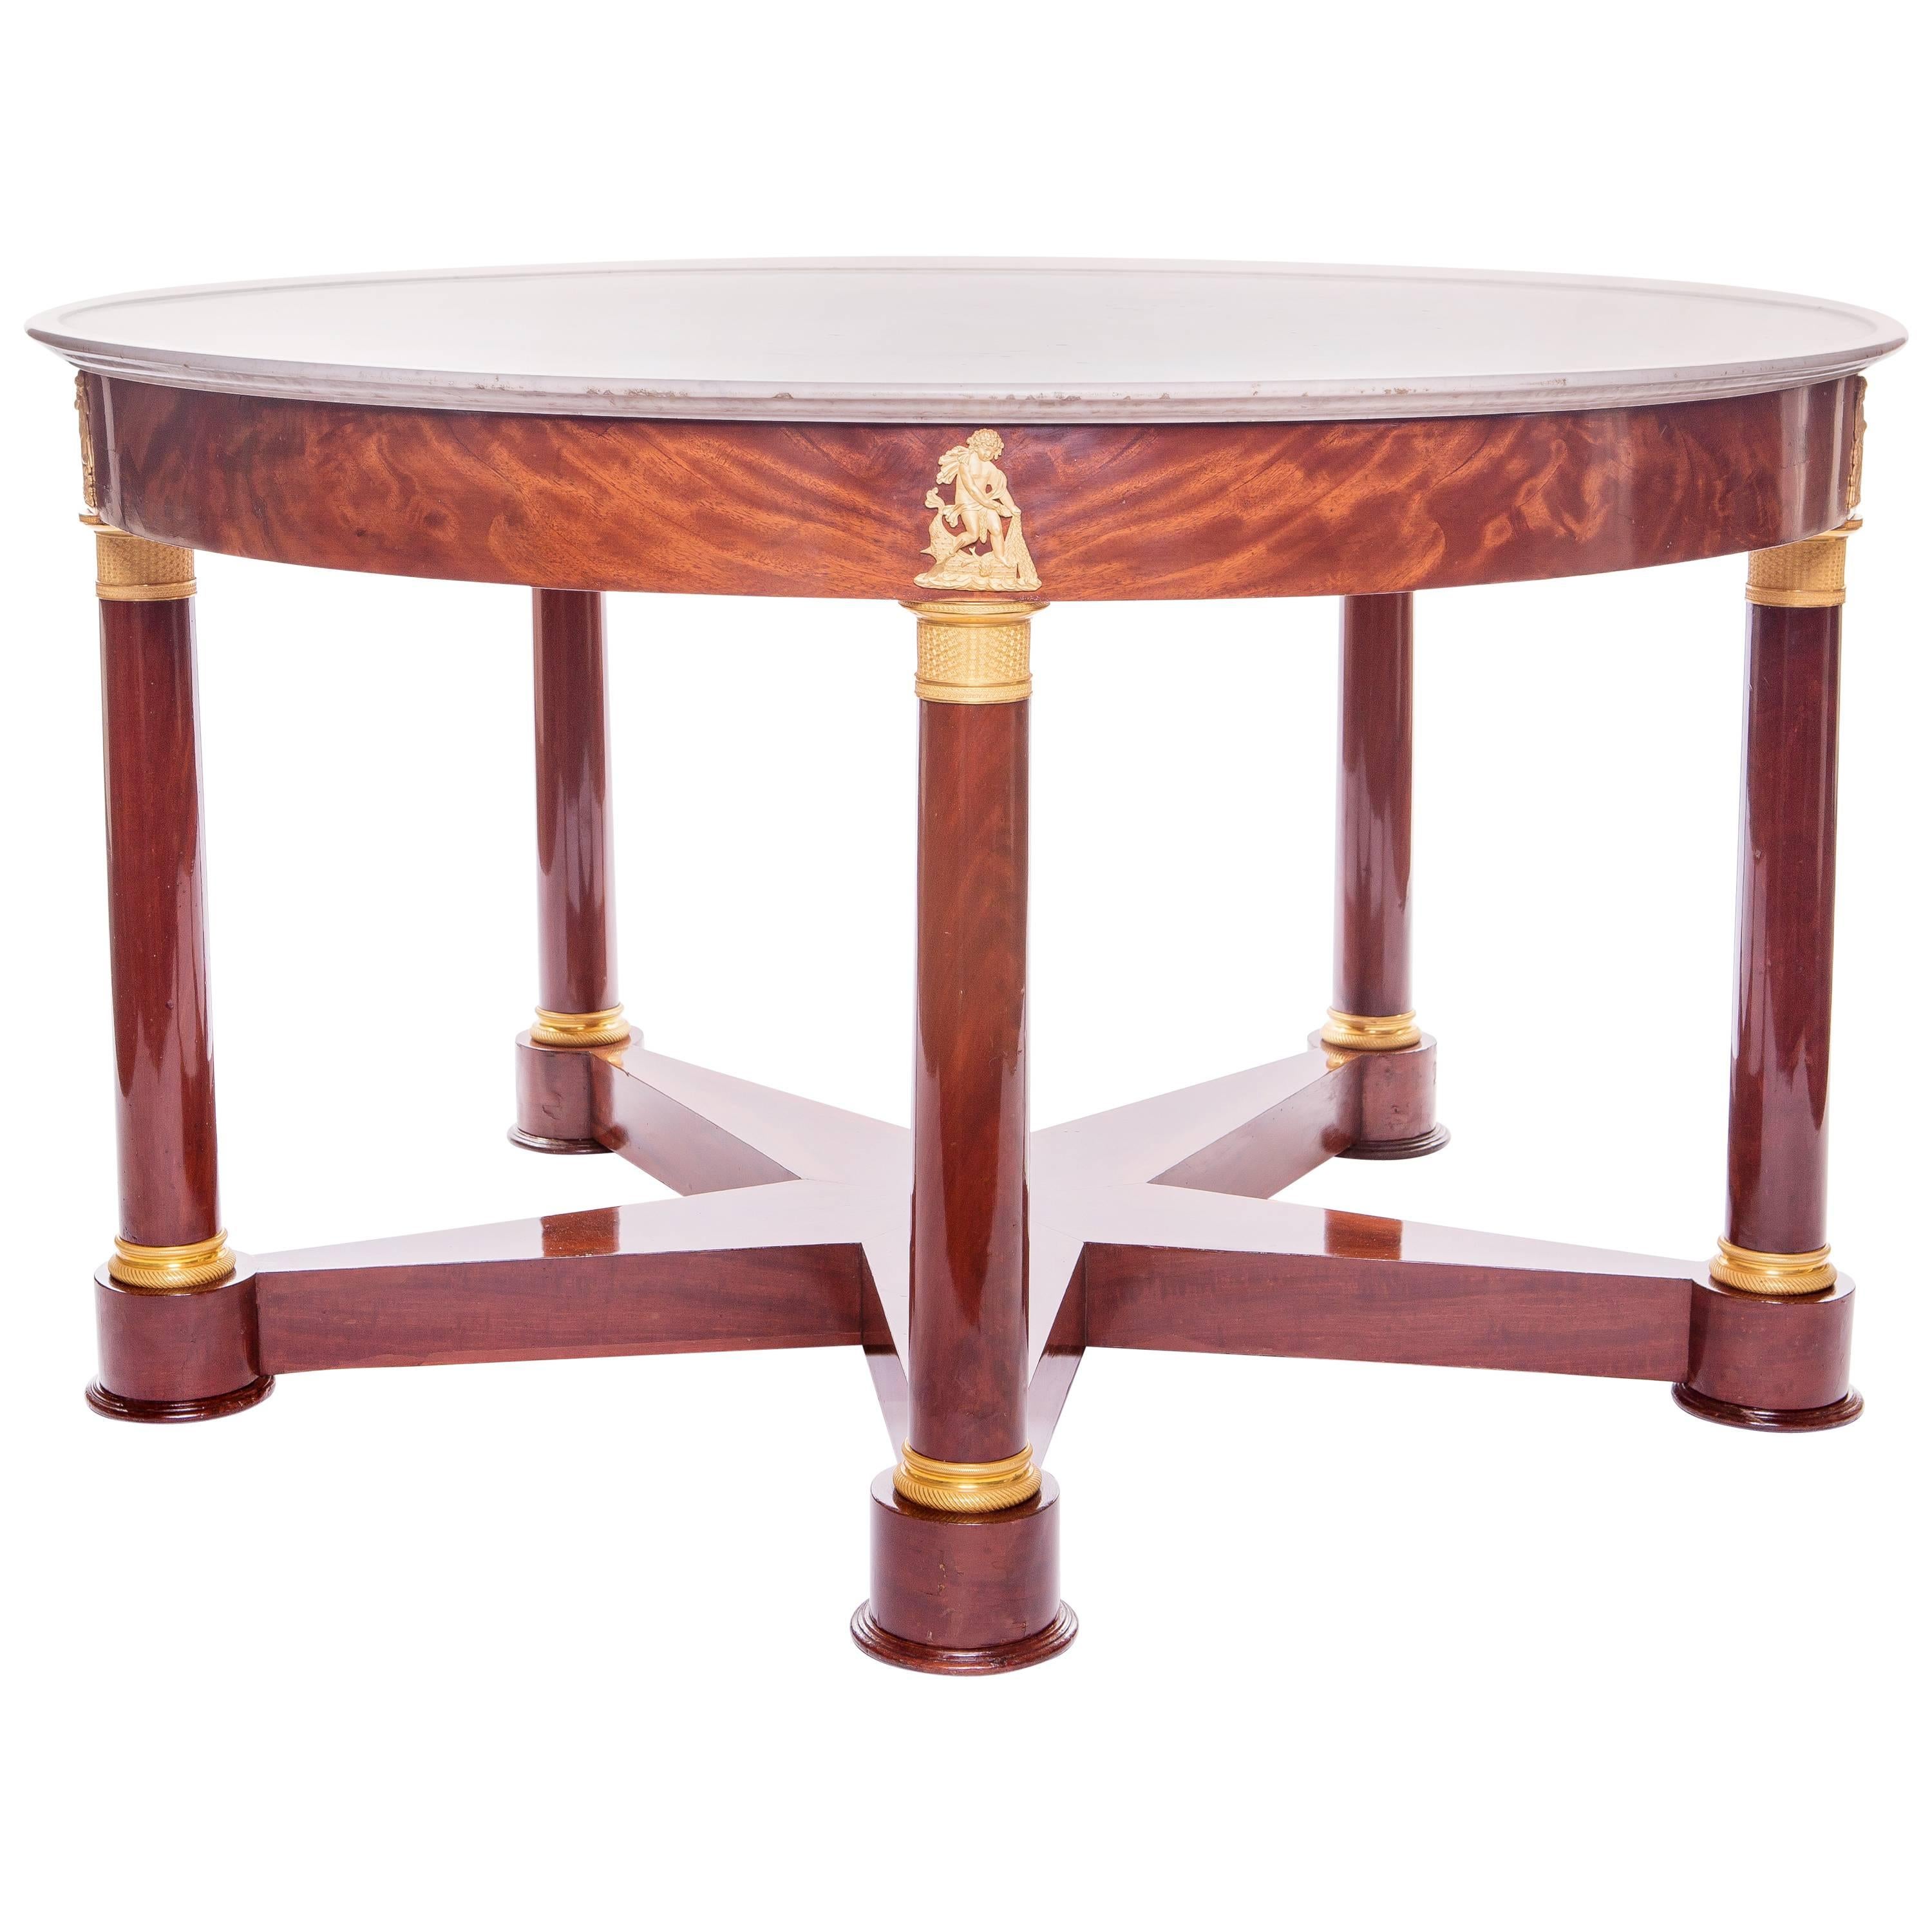 Empire Mahogany, Gilt Bronze Five-Legged Center Table with a Marble Top For Sale